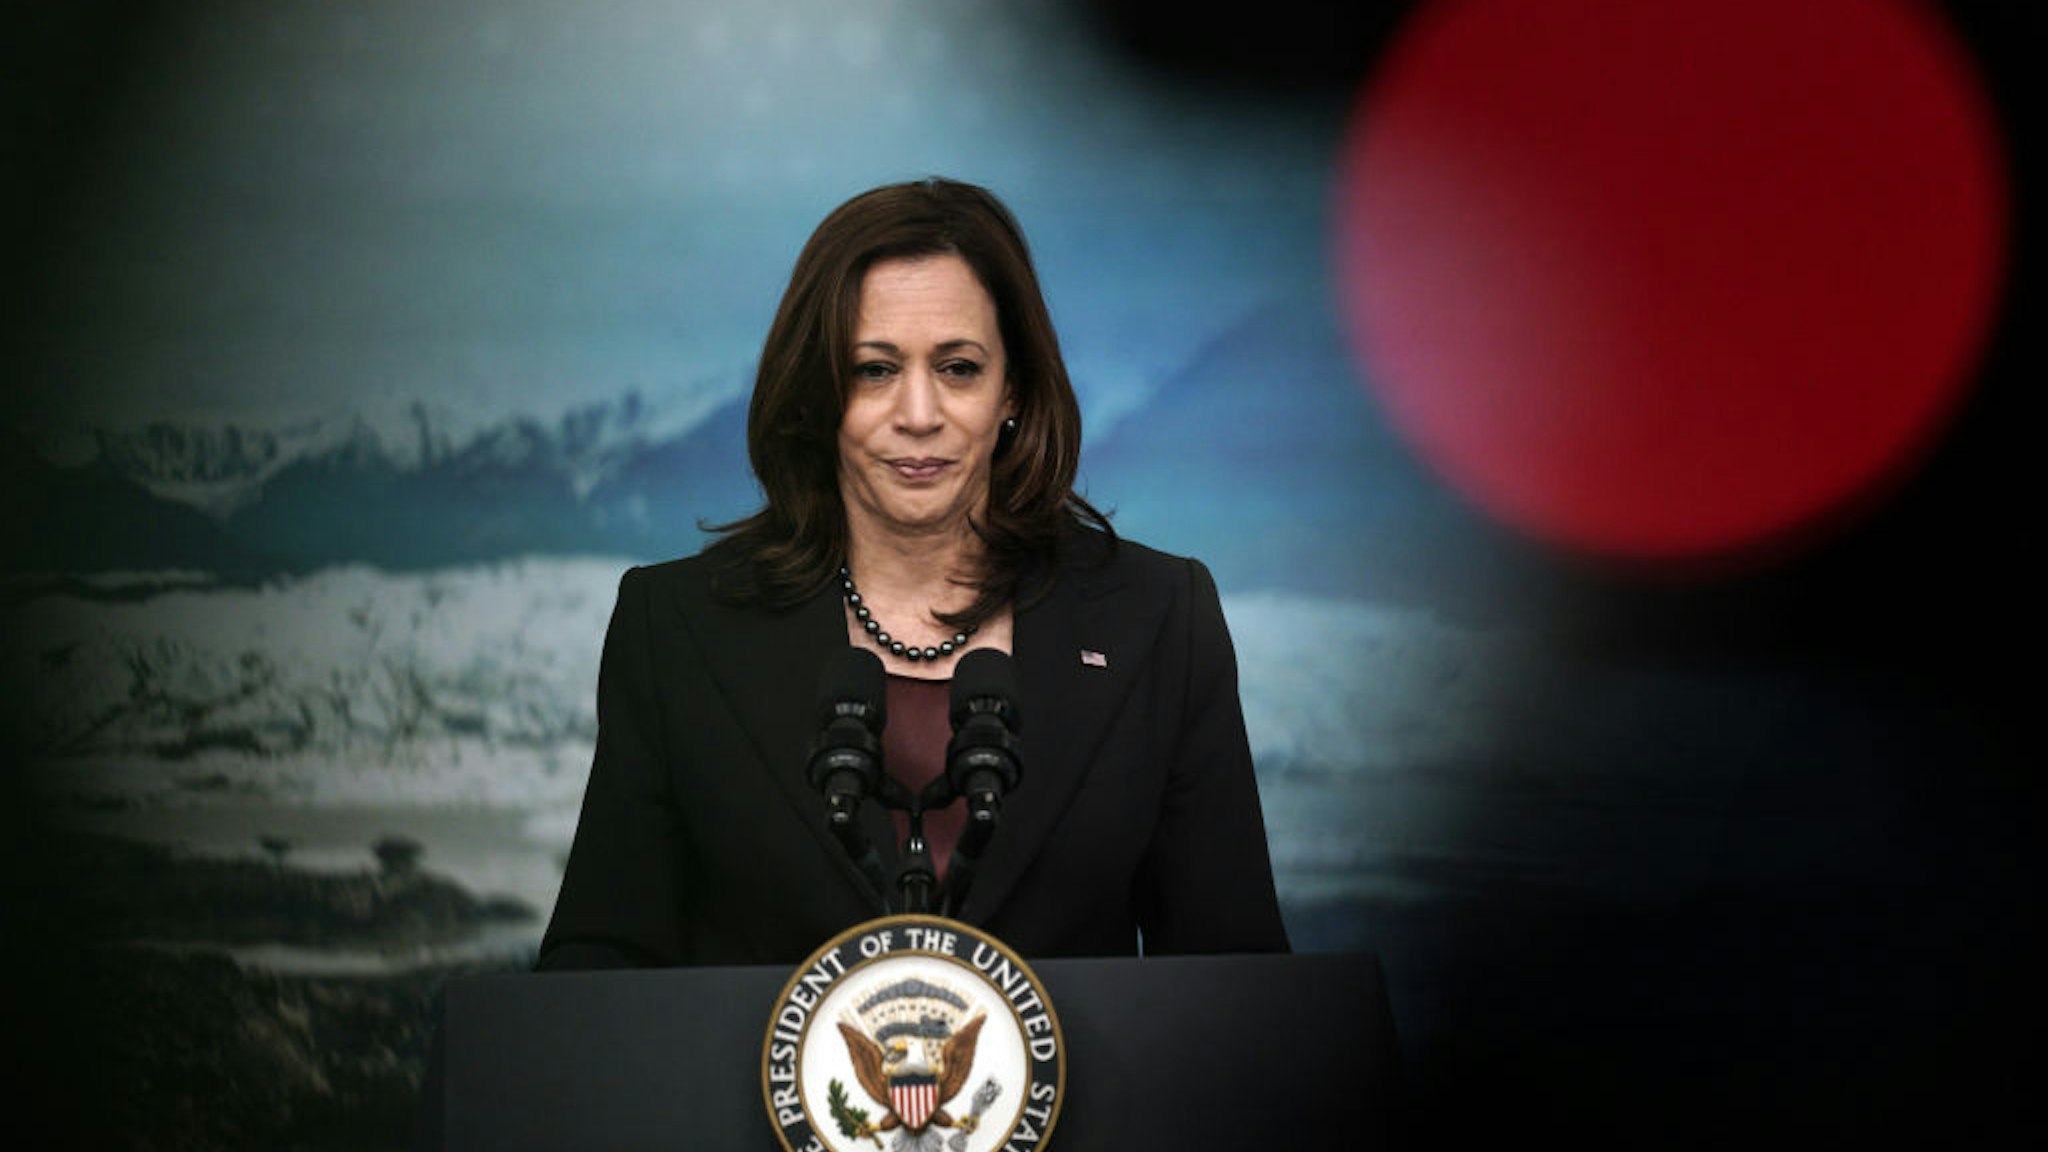 U.S. Vice President Kamala Harris during a Tribal Nations Summit in the Eisenhower Executive Office Building in Washington, D.C., U.S., on Tuesday, Nov. 16, 2021.